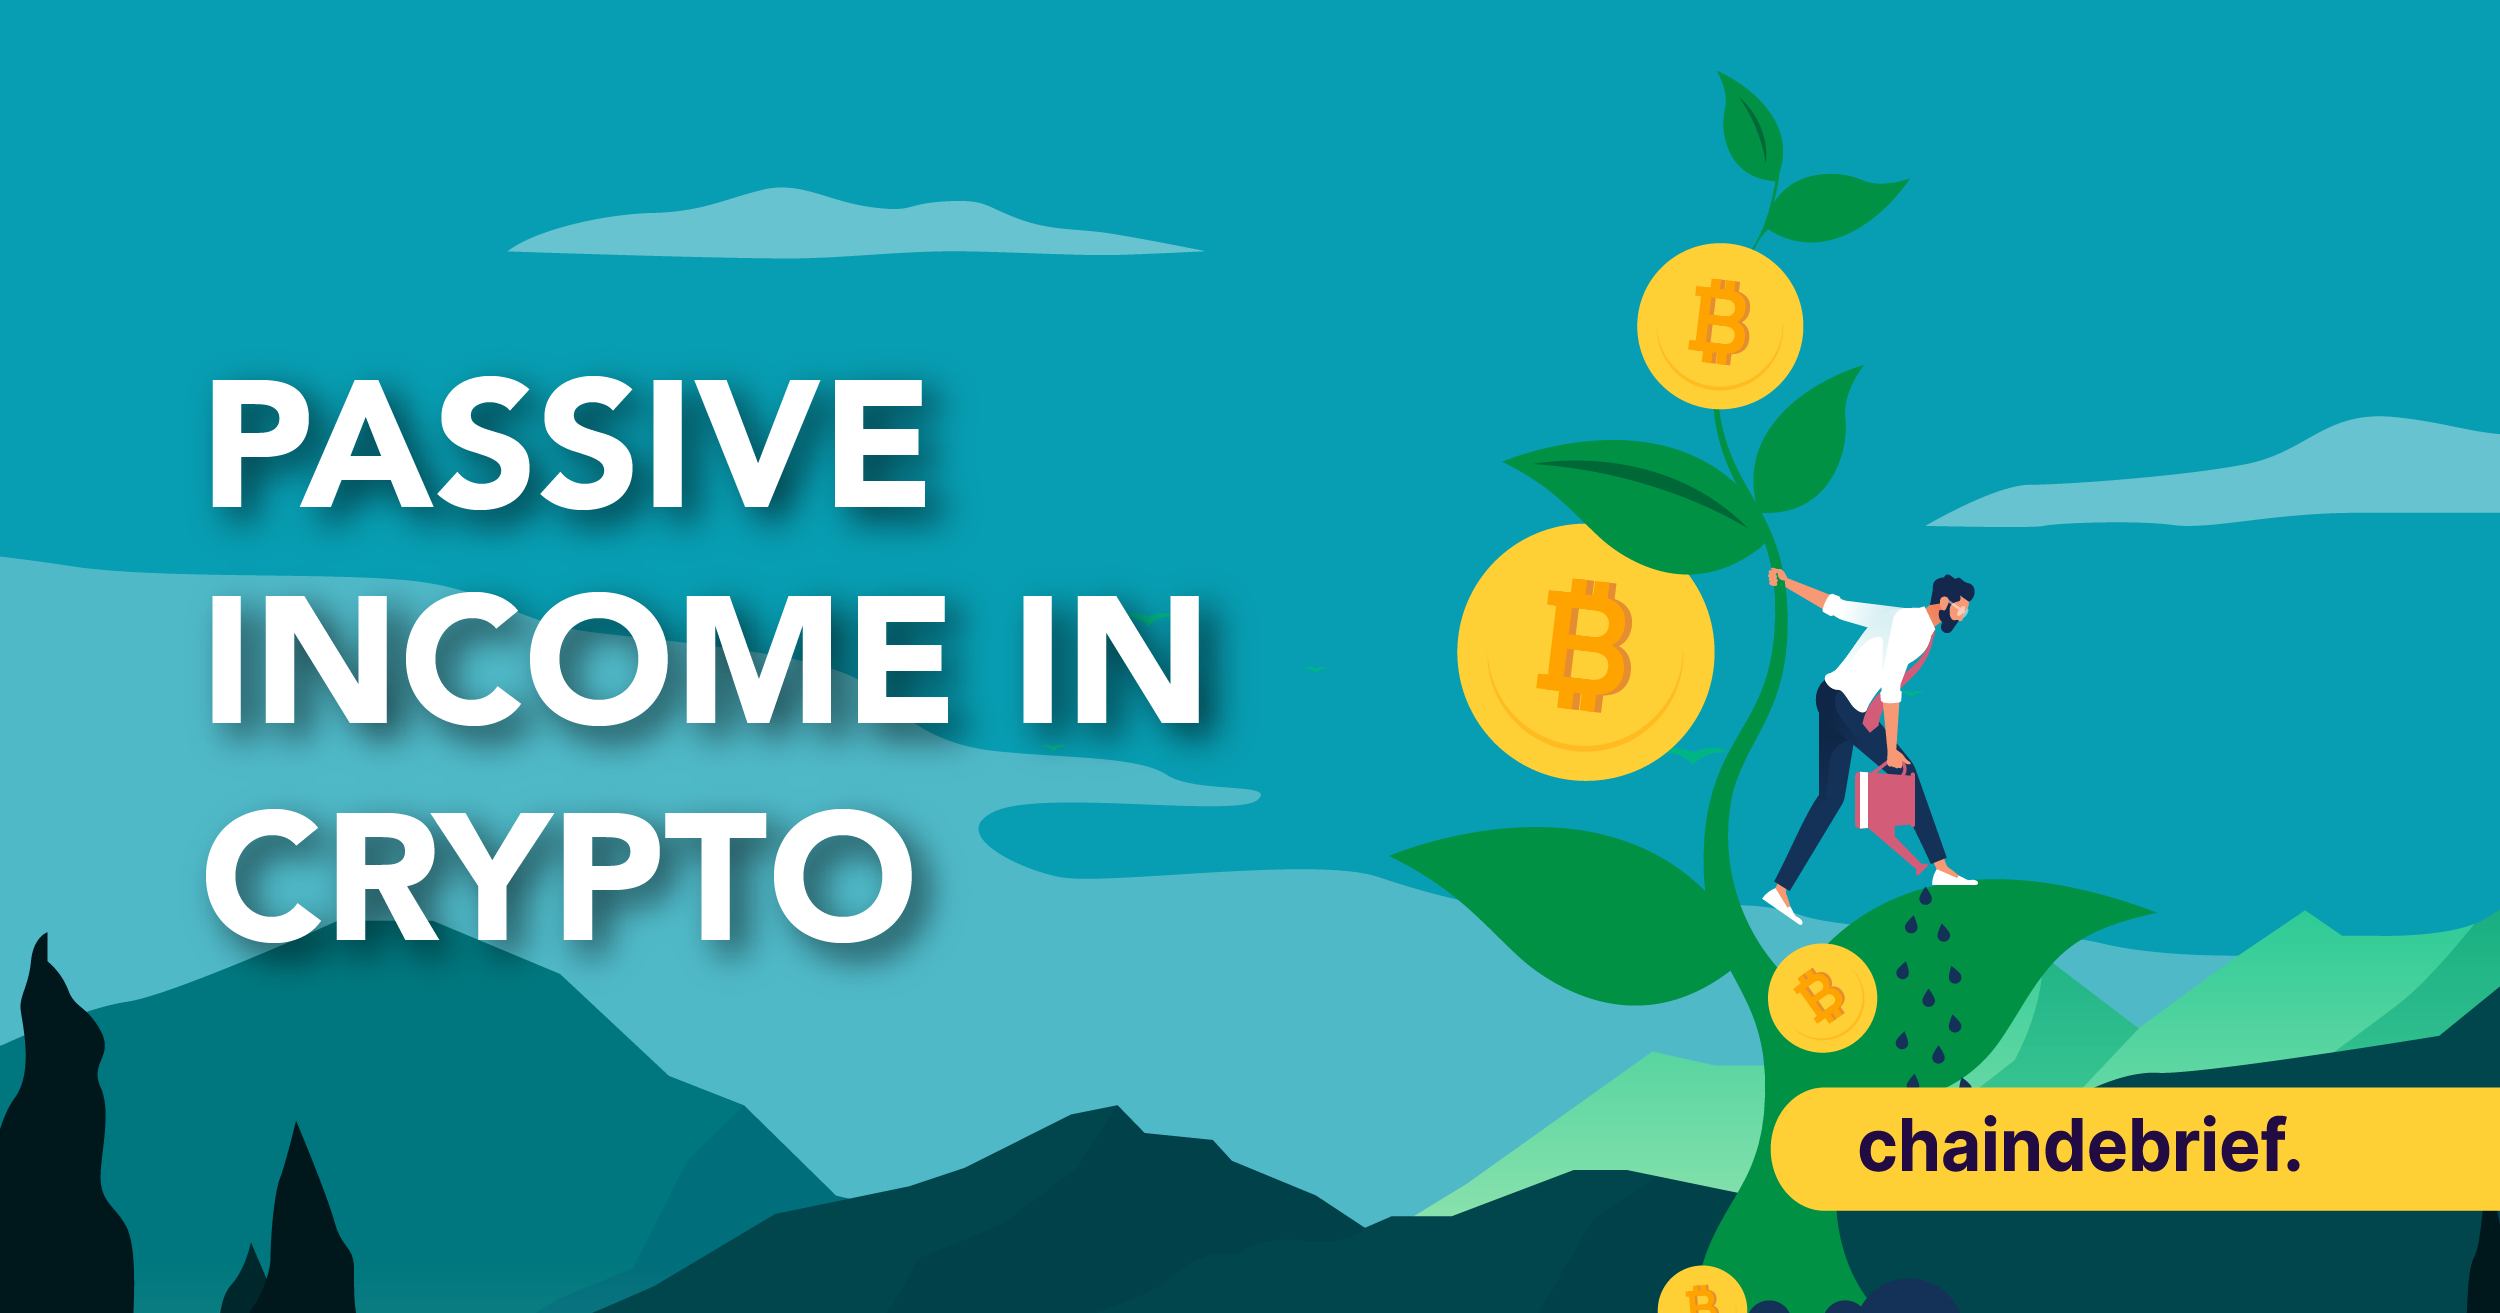 Earn Passive Income: Here’s 5 Things You Can Do With Your Idling Crypto Assets